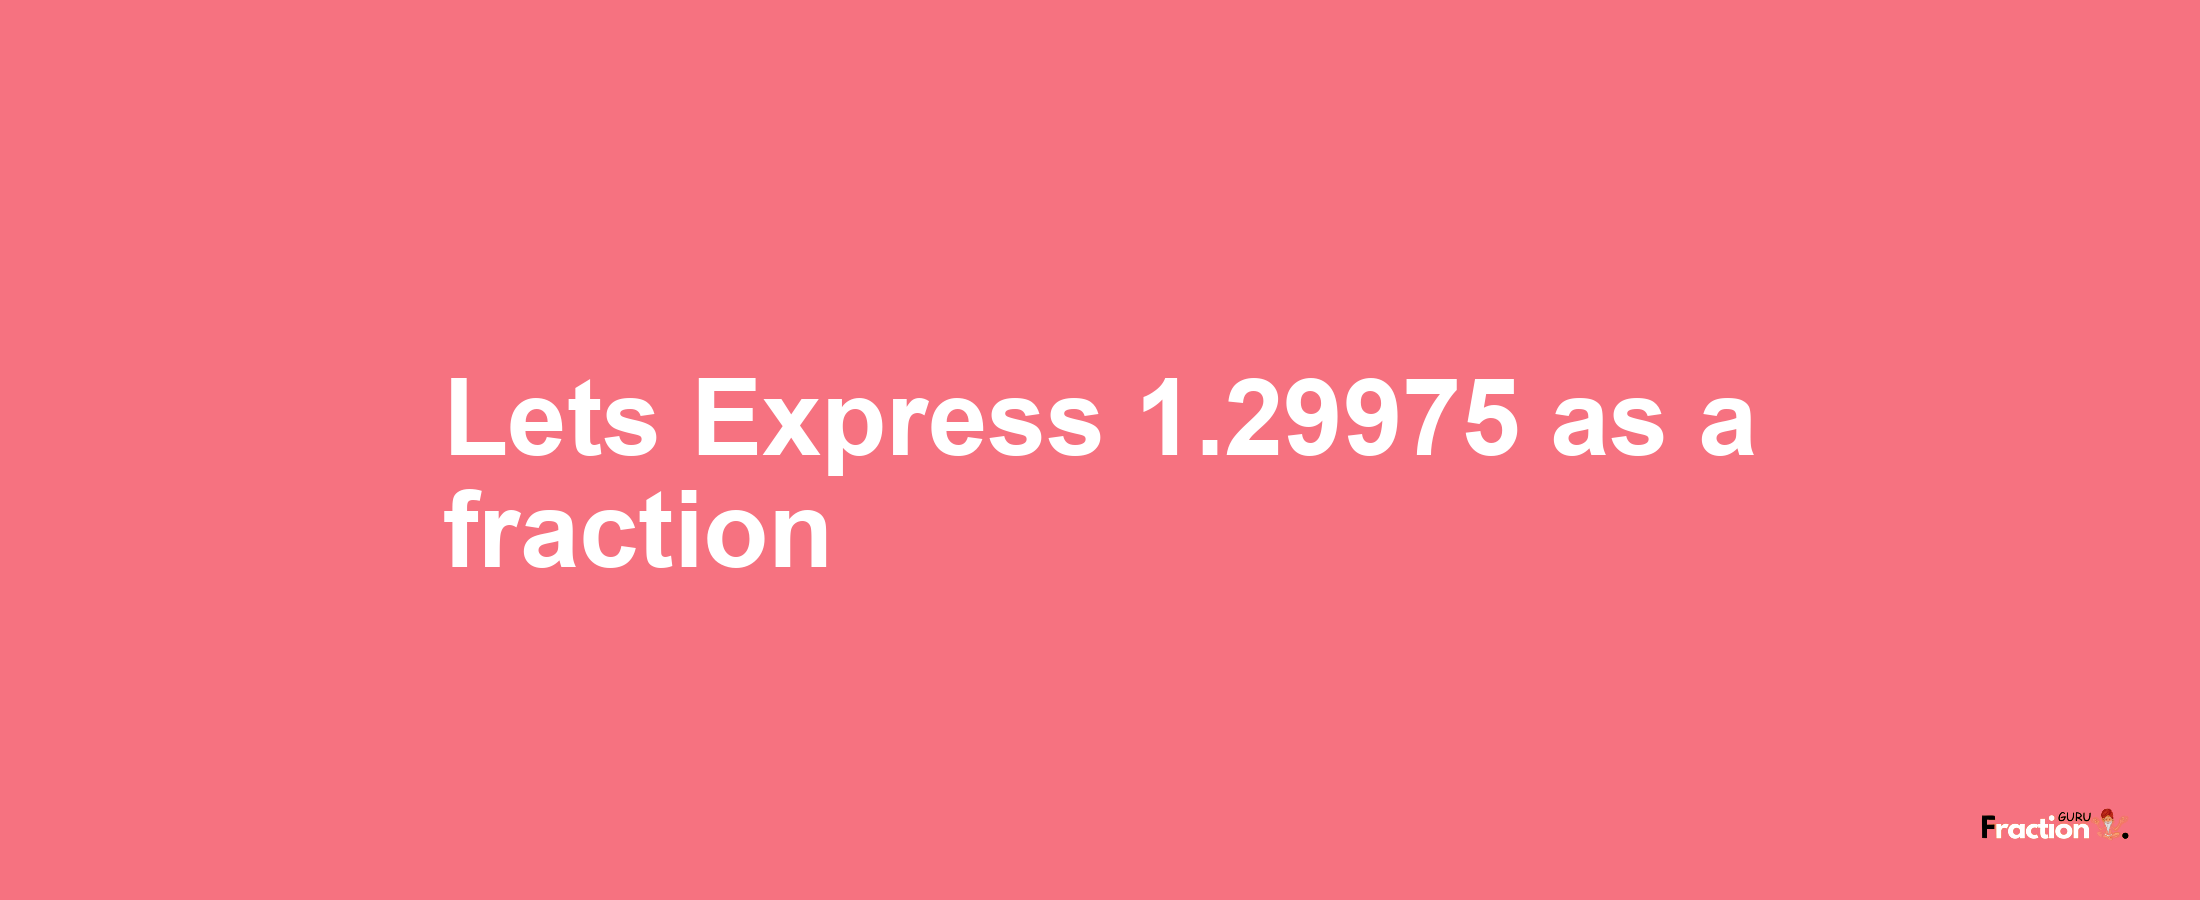 Lets Express 1.29975 as afraction